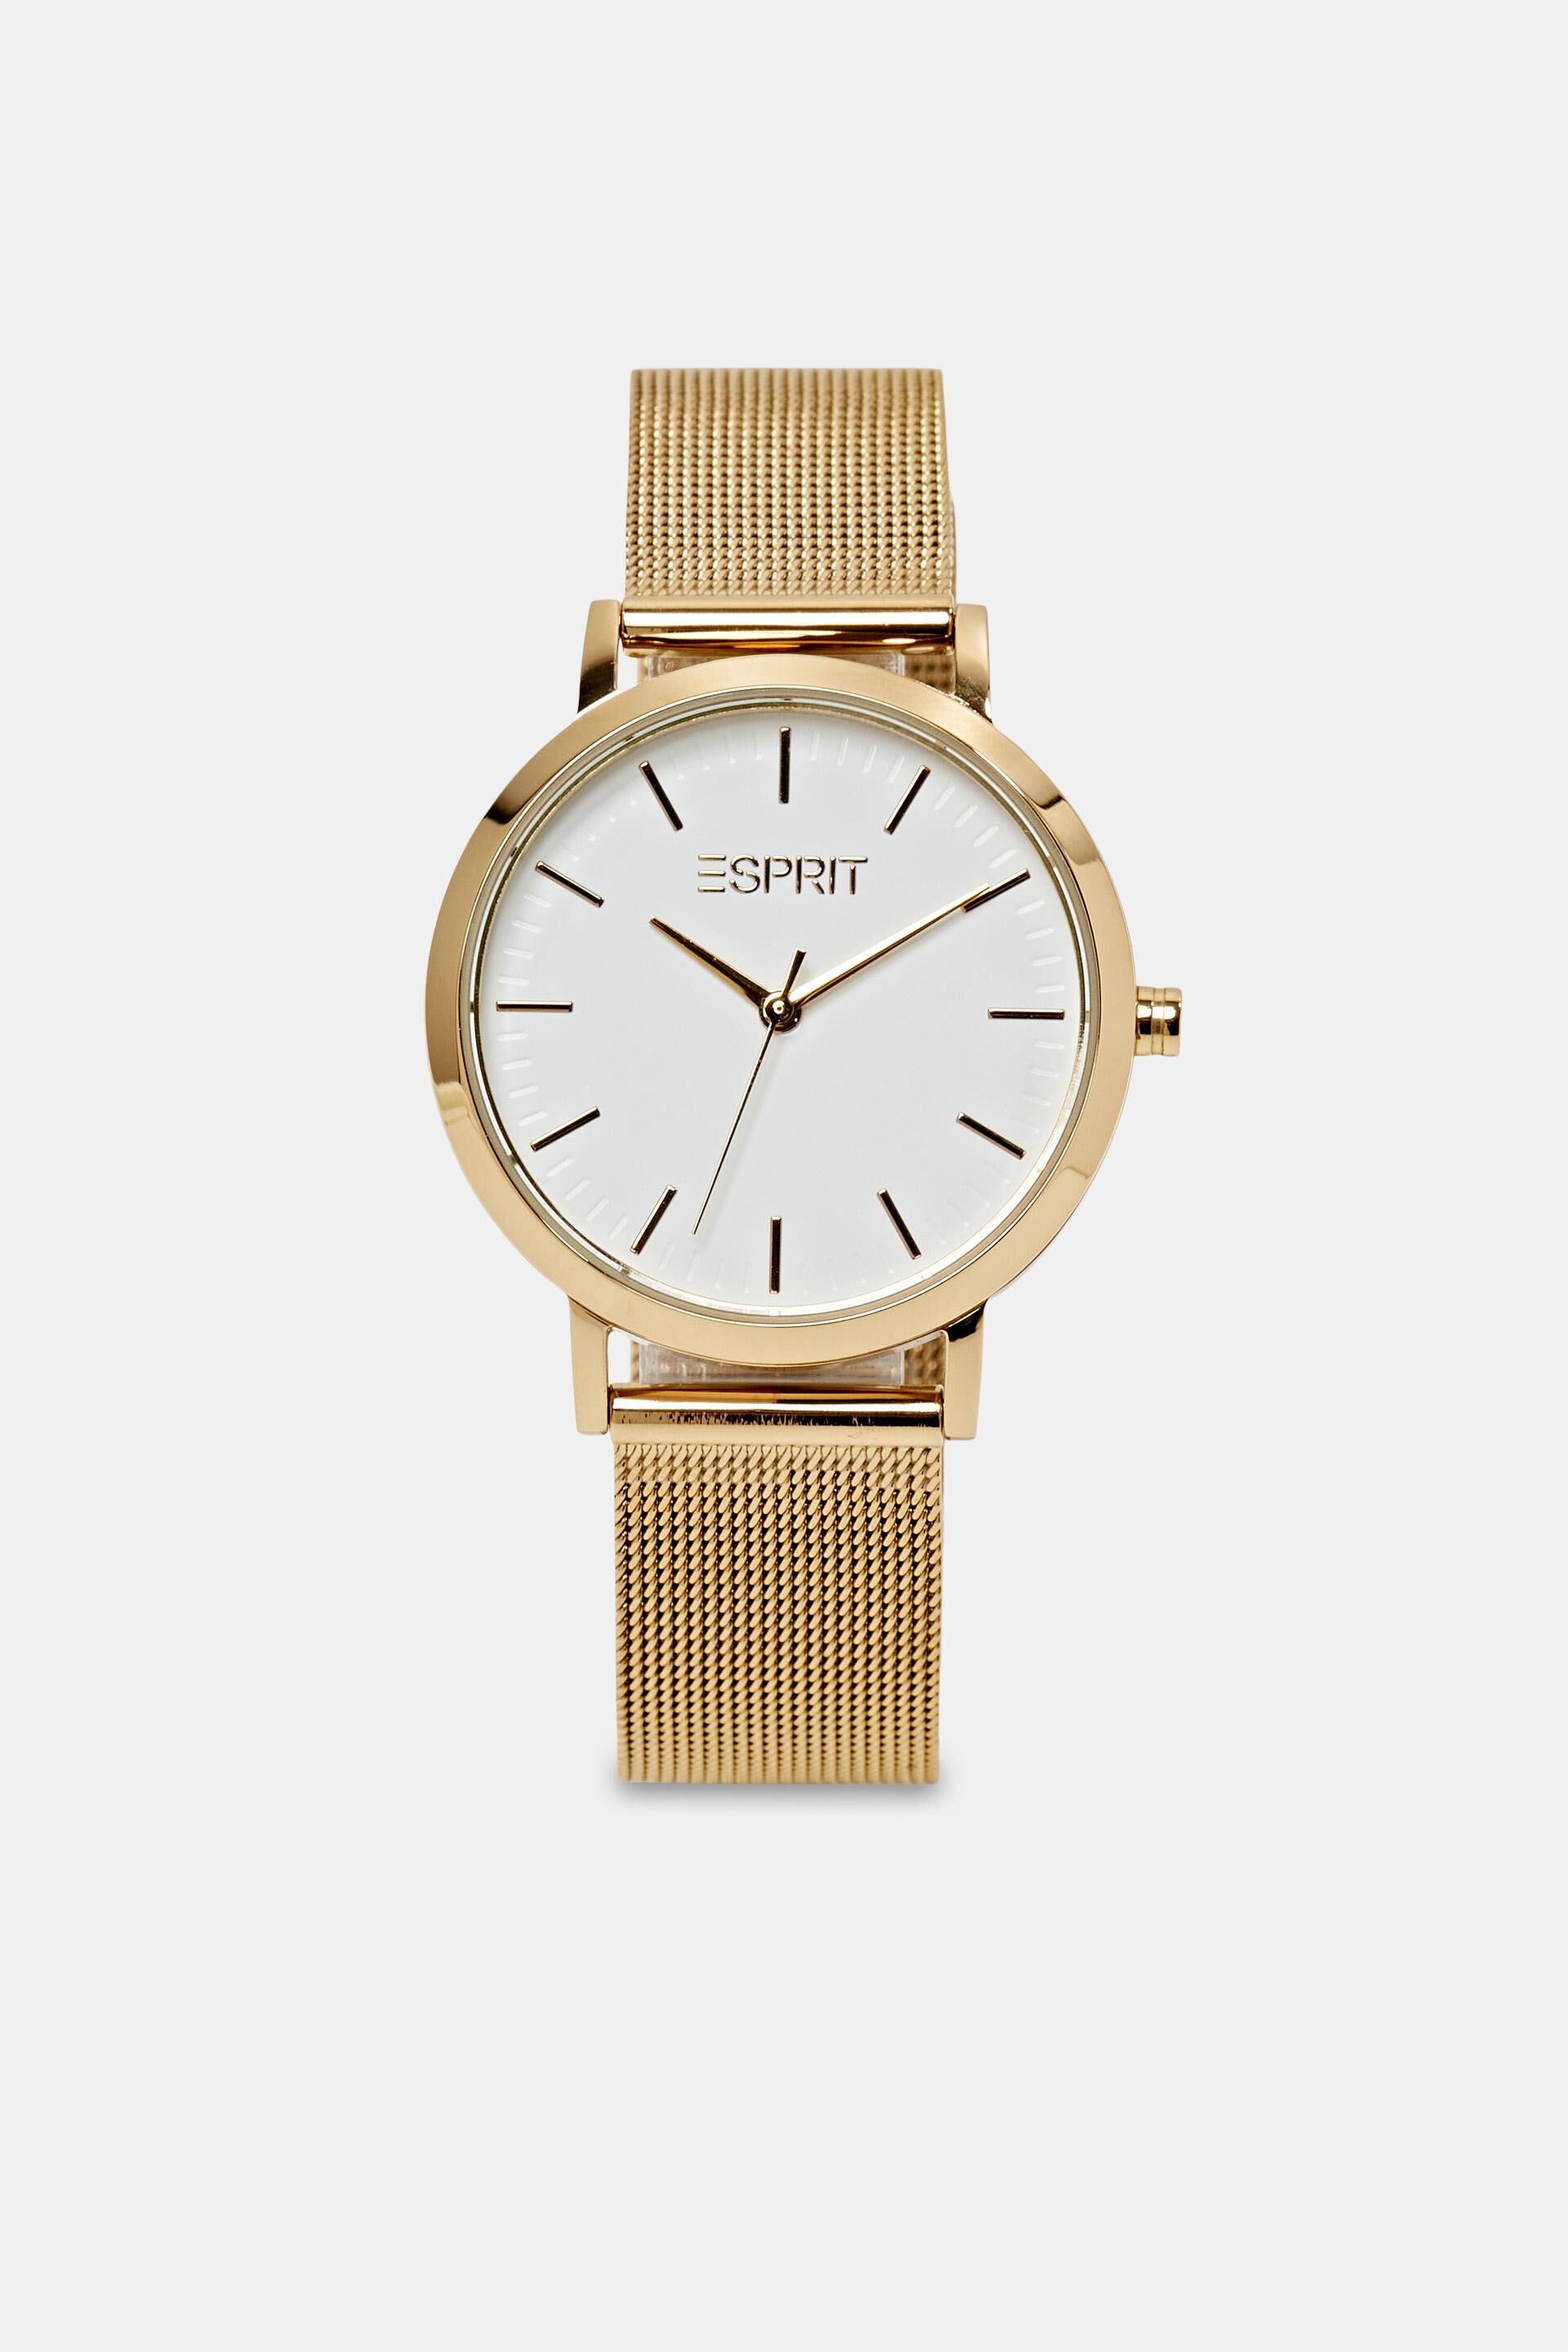 Esprit a watch mesh Stainless strap steel with